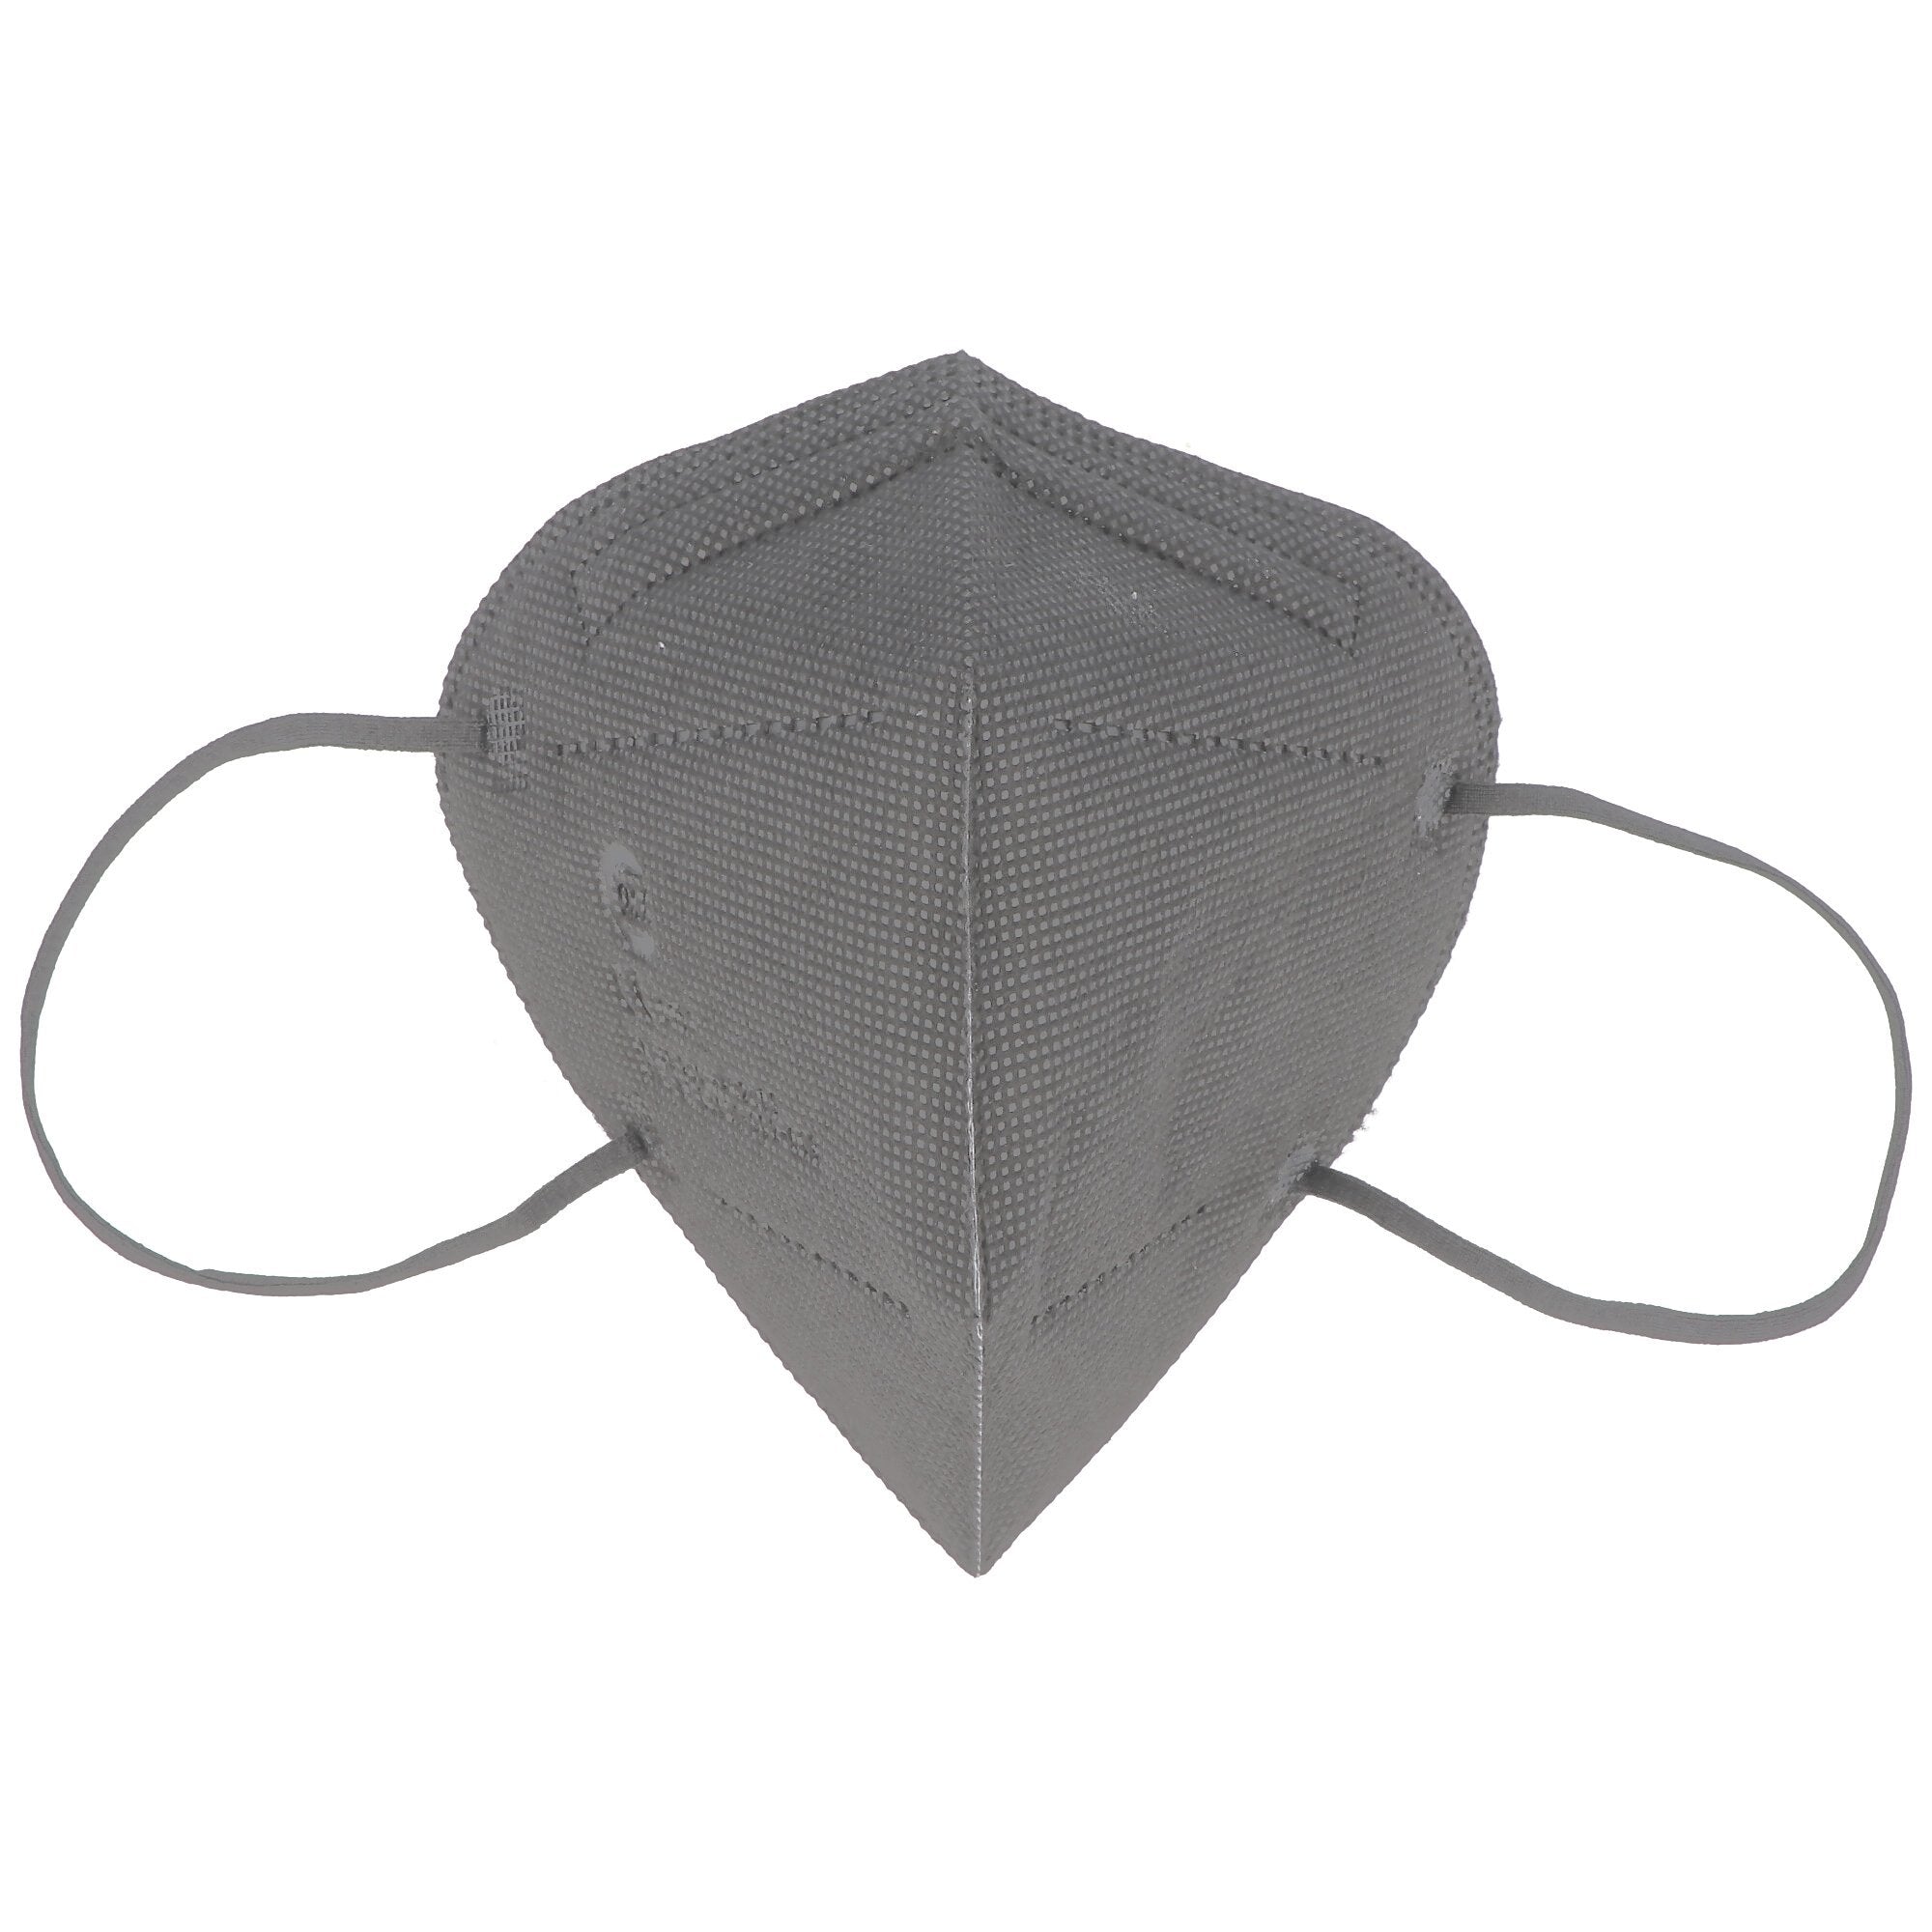 20 pieces FFP2 mask gray 5-layer, certified according to DIN EN149: 2001 + A1: 2009, particle filter